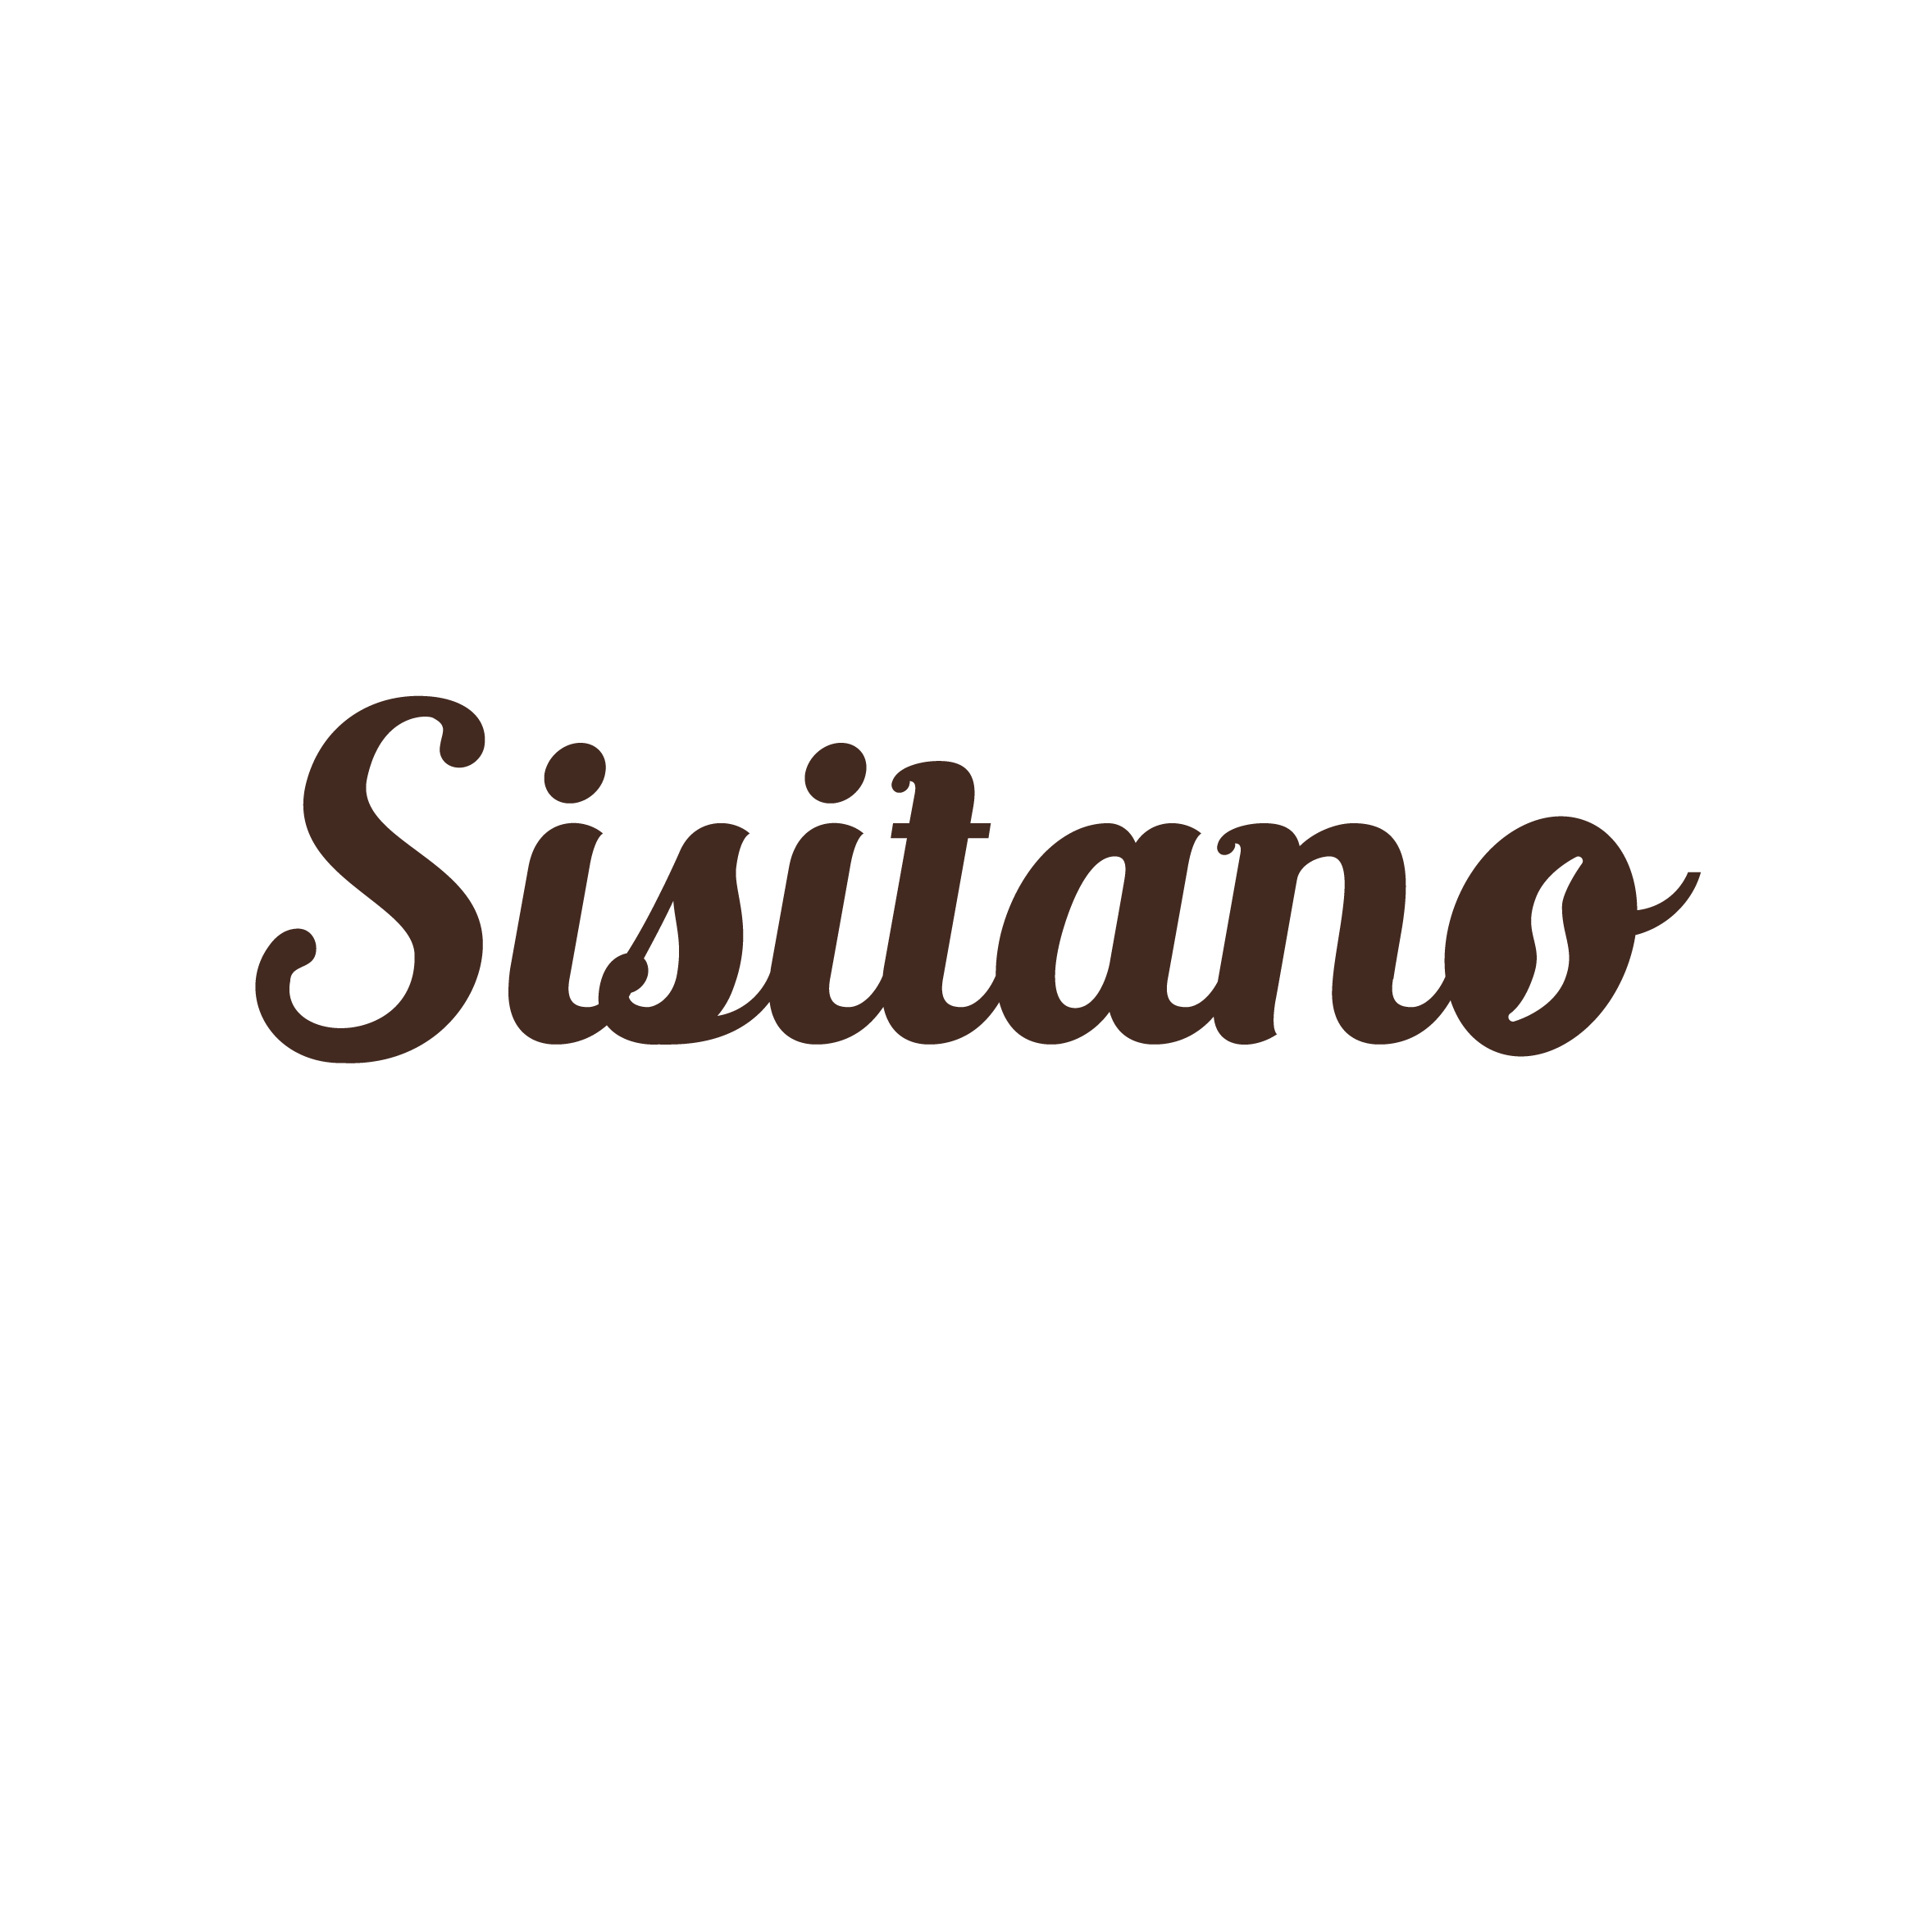 Sisitano: When It's Time For Coffee